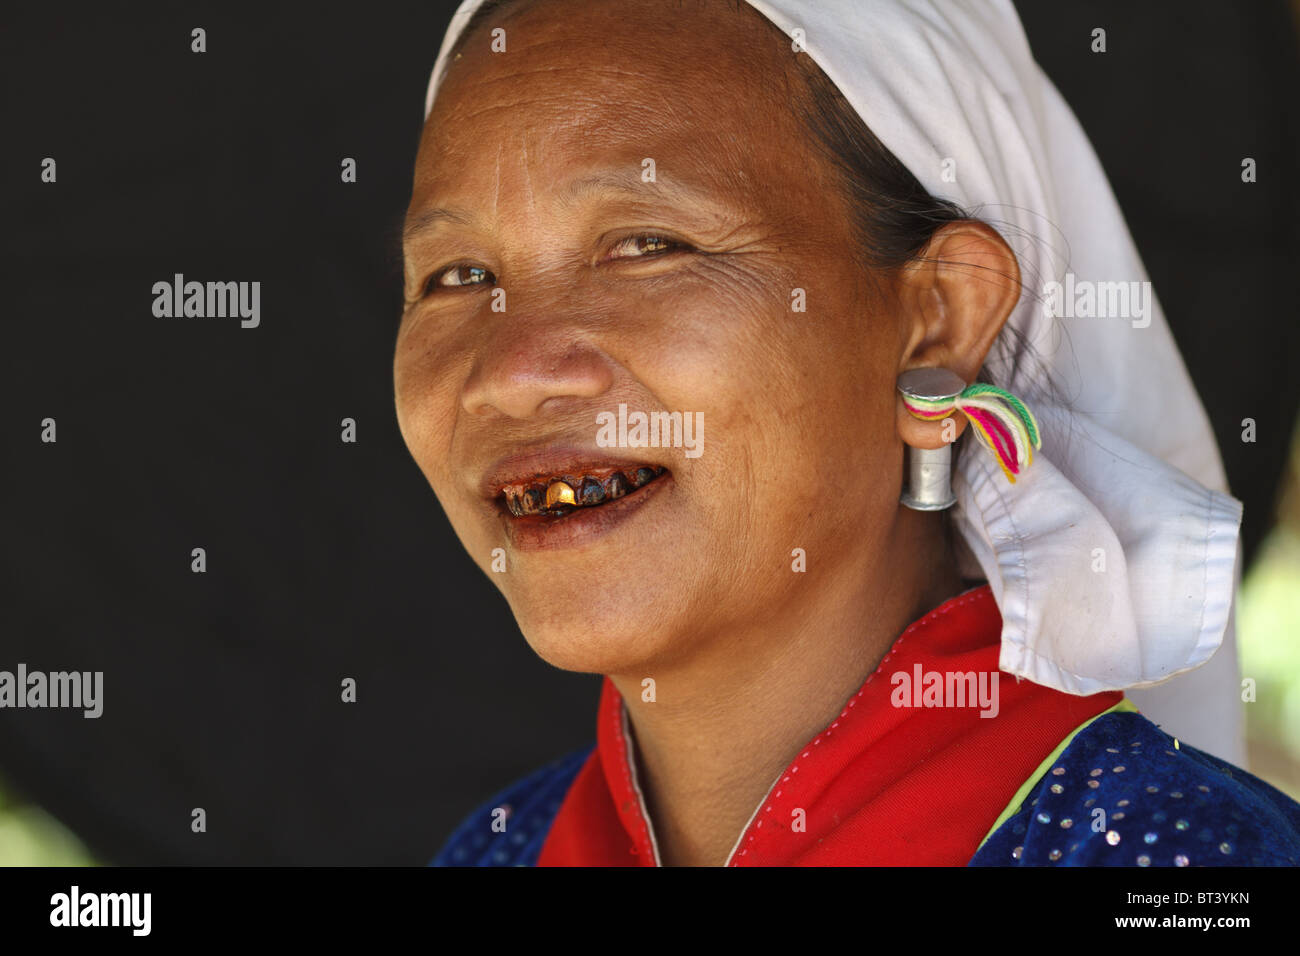 Palaung minority woman from myanamar (Burma) photographed in Thailand Stock Photo